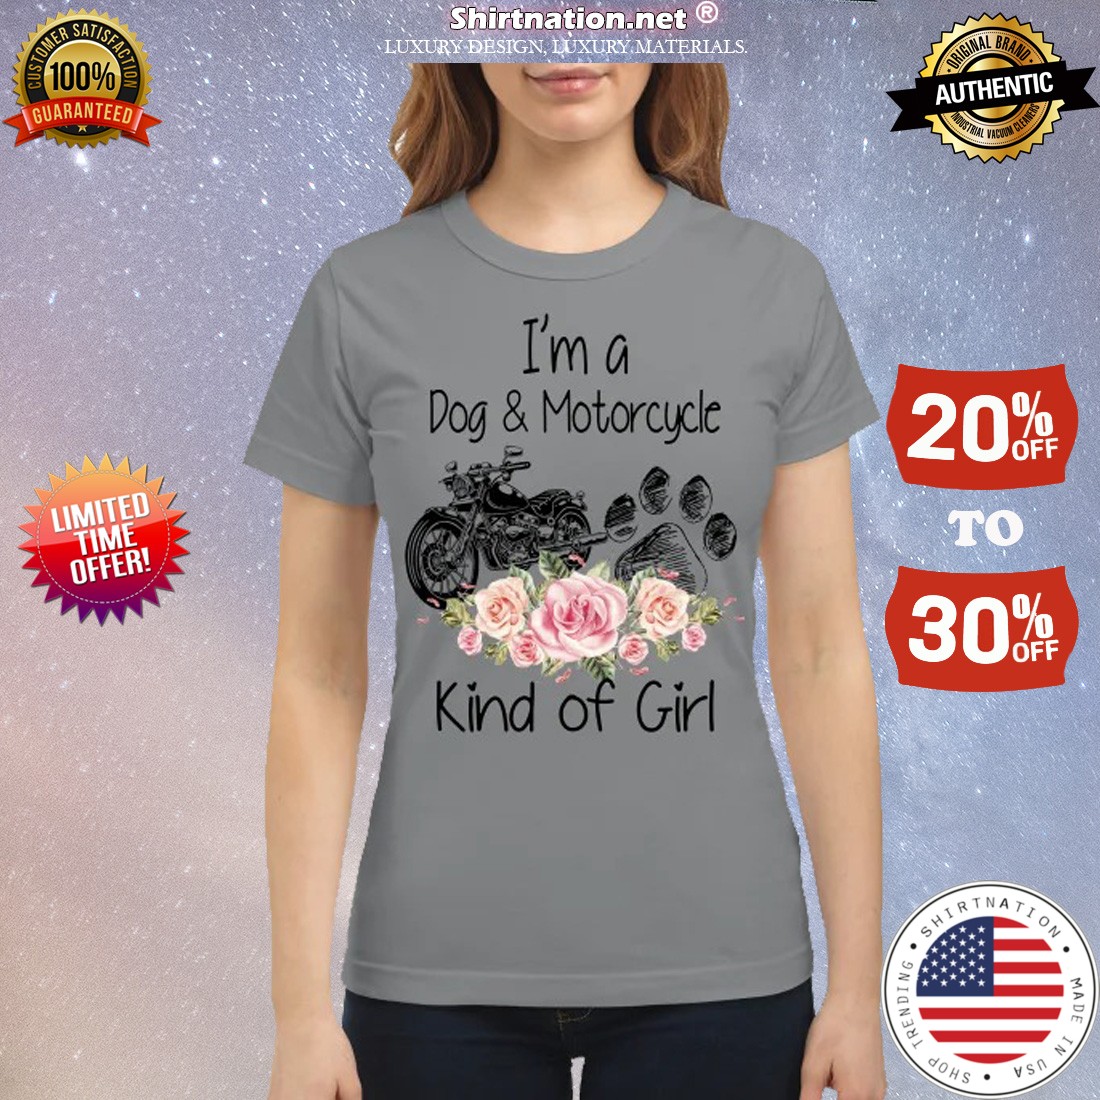 I'm a dog and motorcycle kind of girl shirt